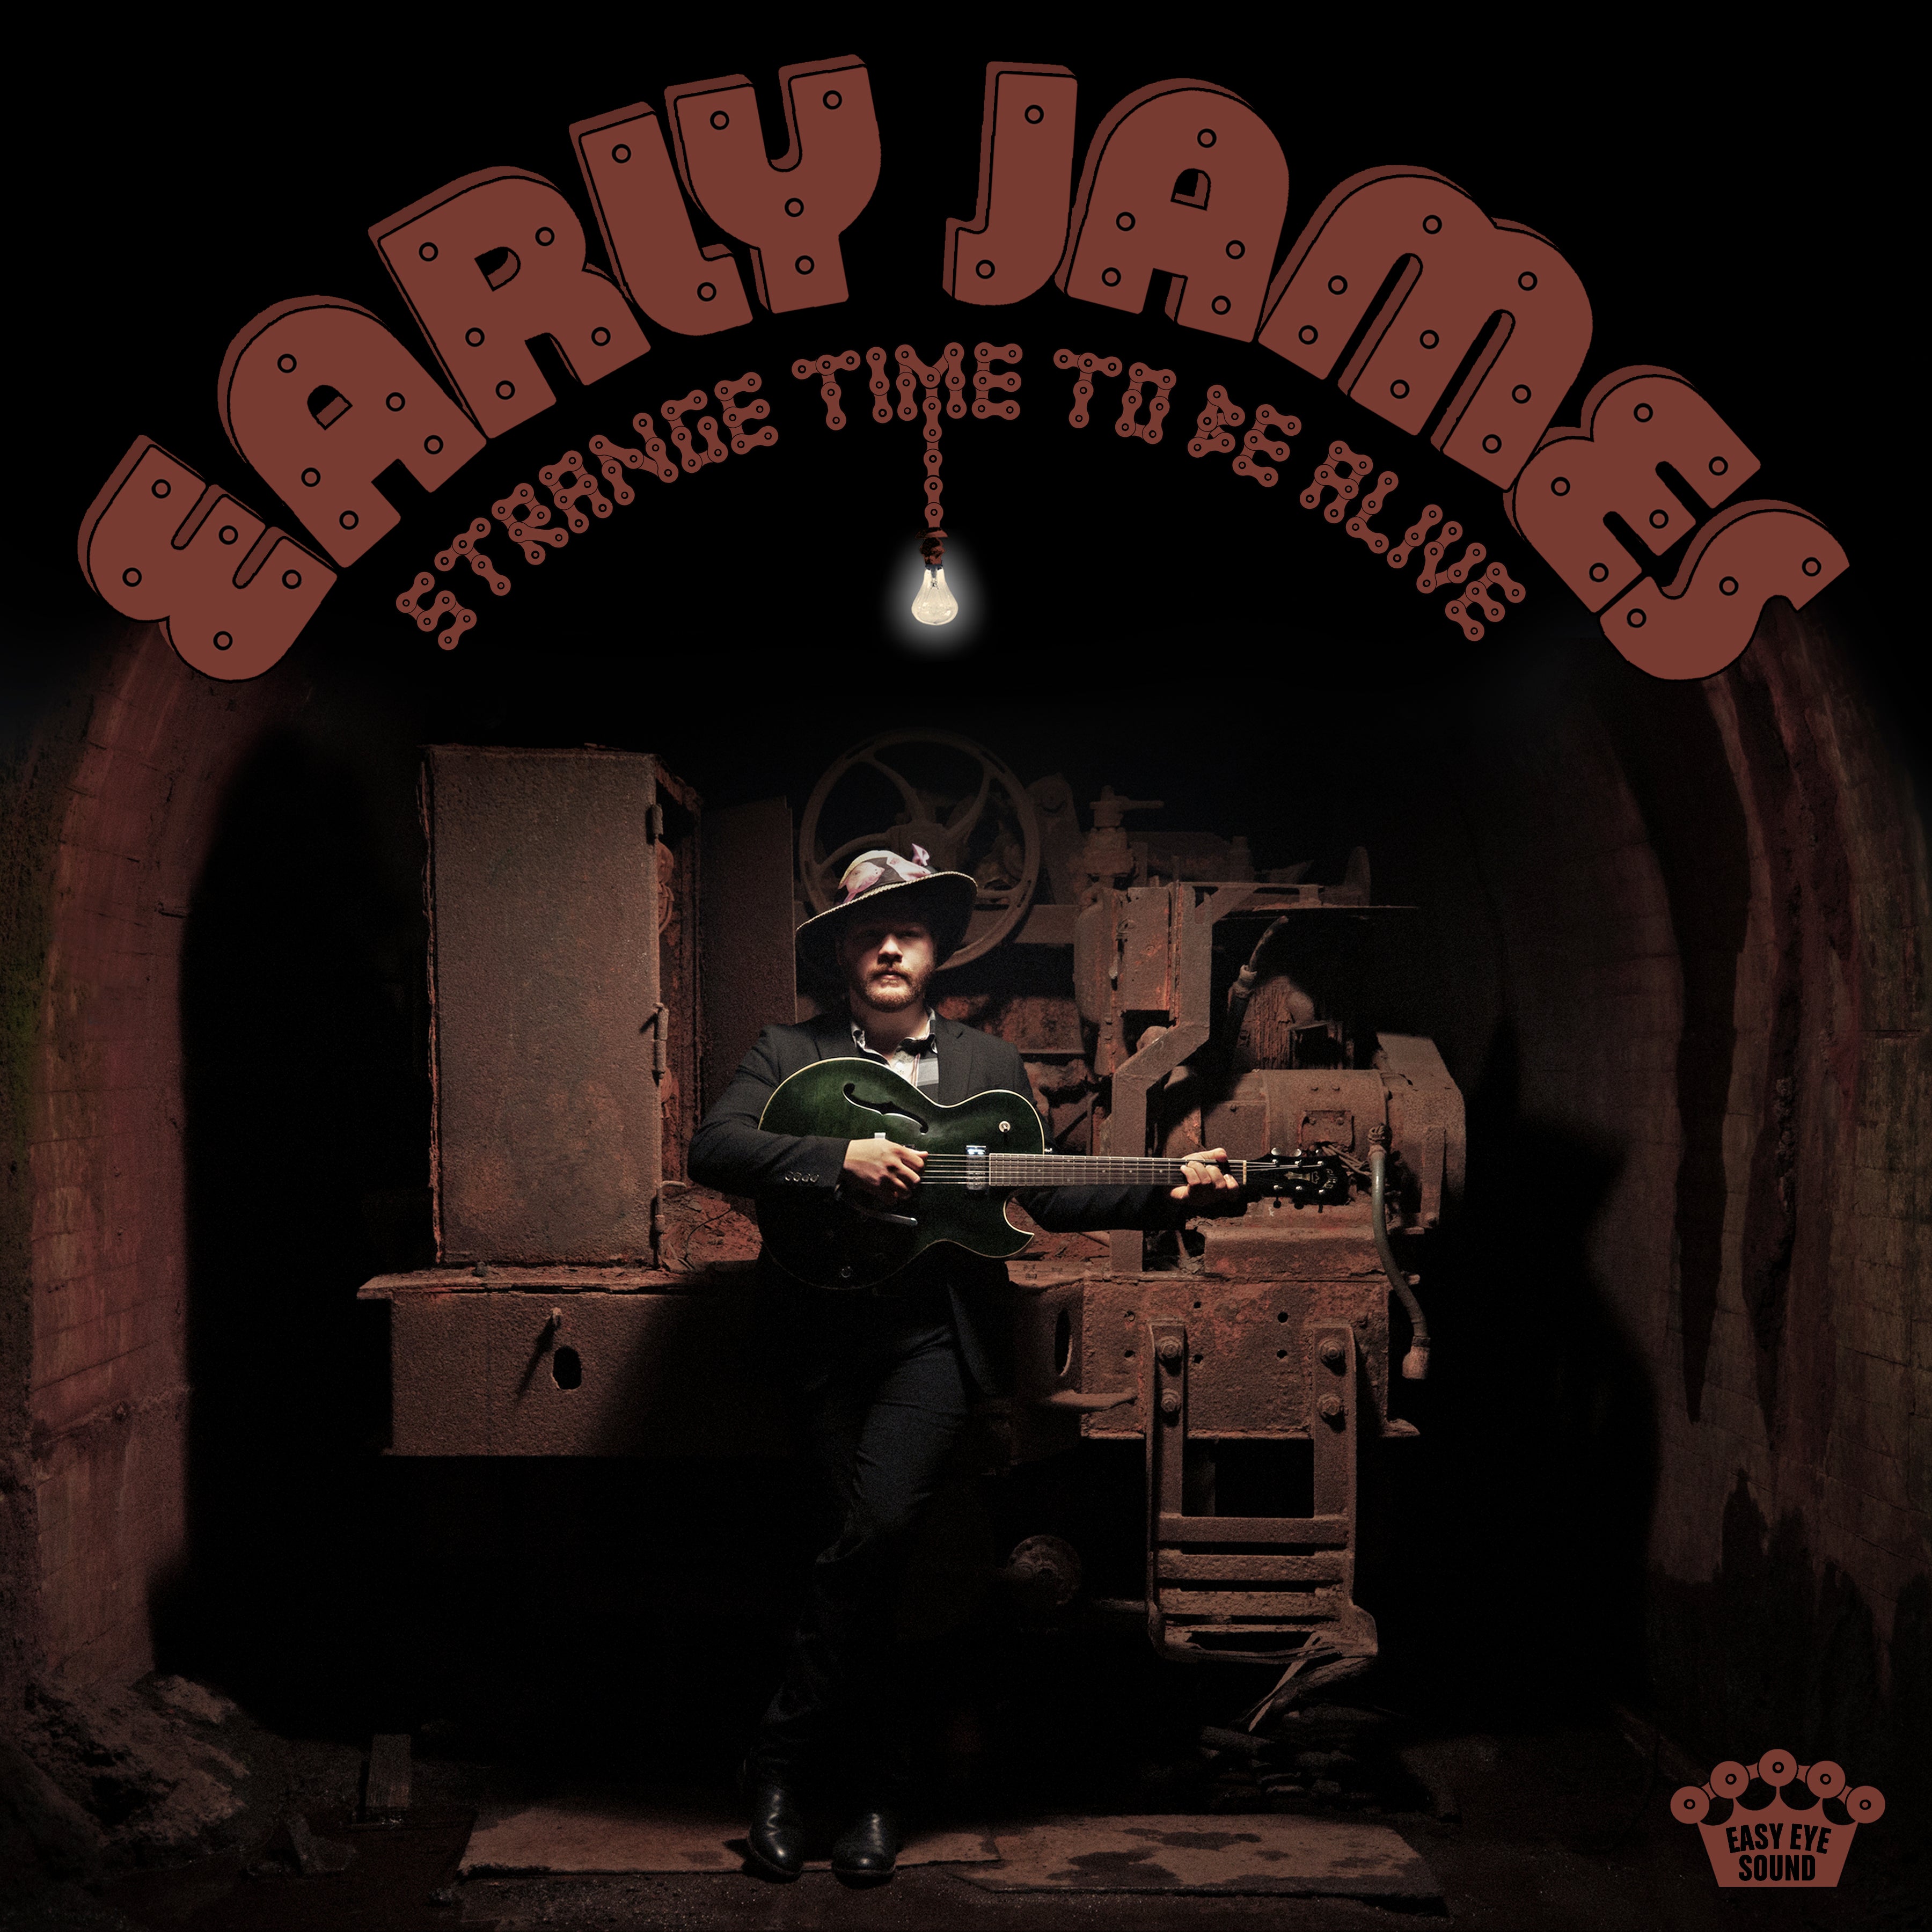 Early James' Strange Time To Be Alive (Deluxe Edition) is out now!